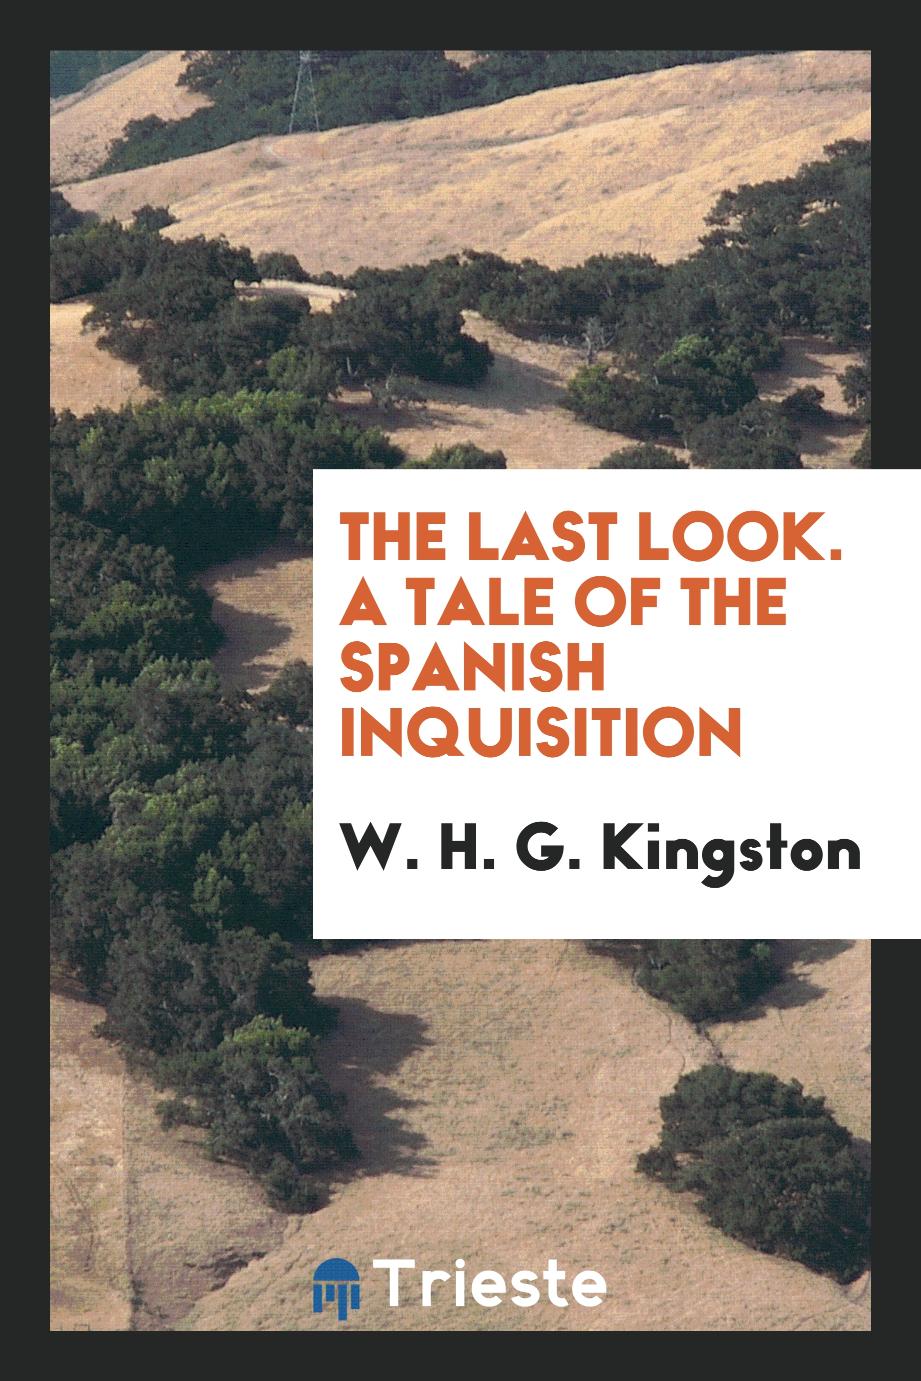 The Last Look. A Tale of the Spanish Inquisition